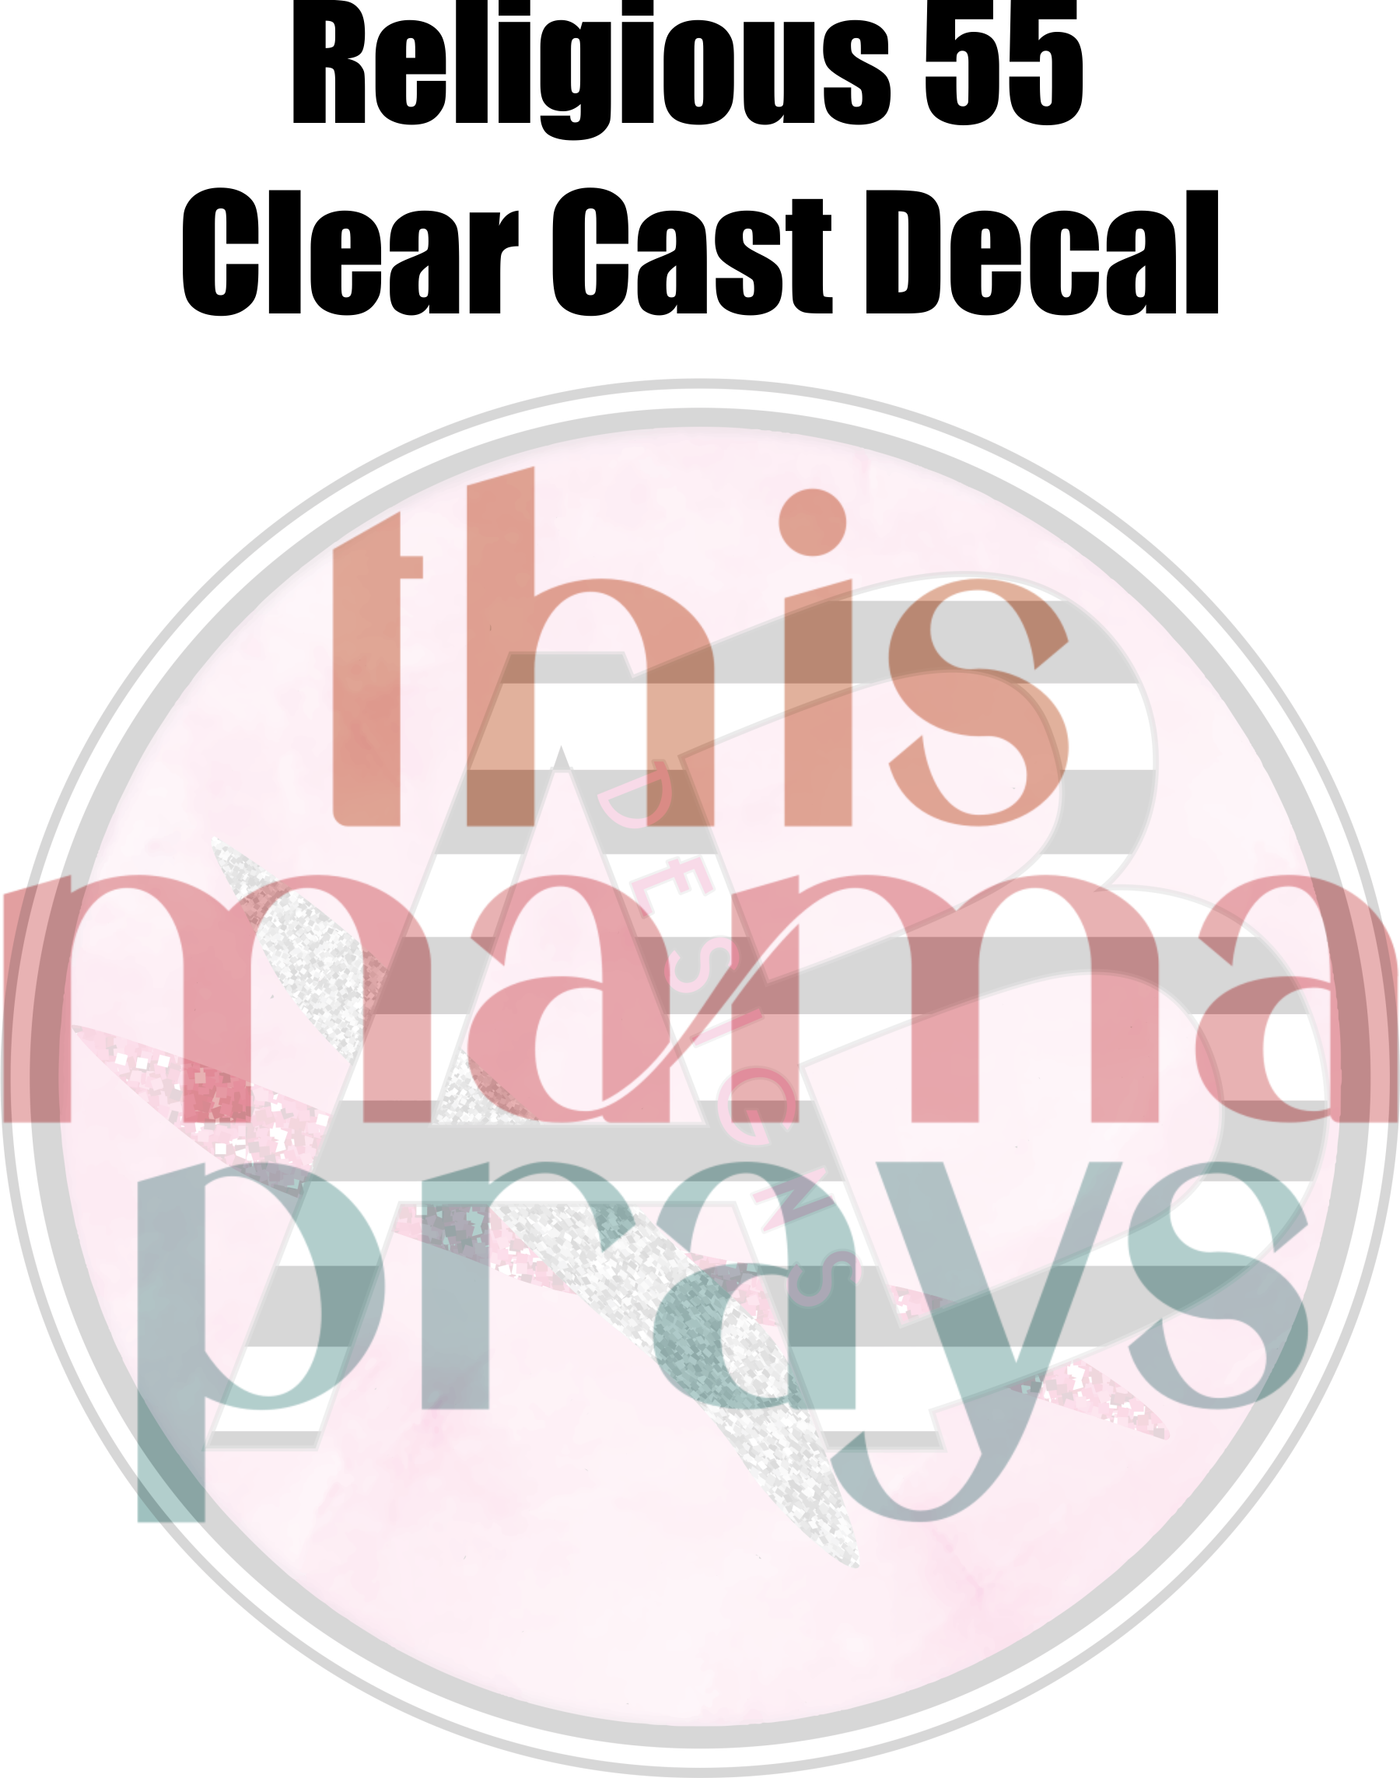 Religious 55 - Clear Cast Decal